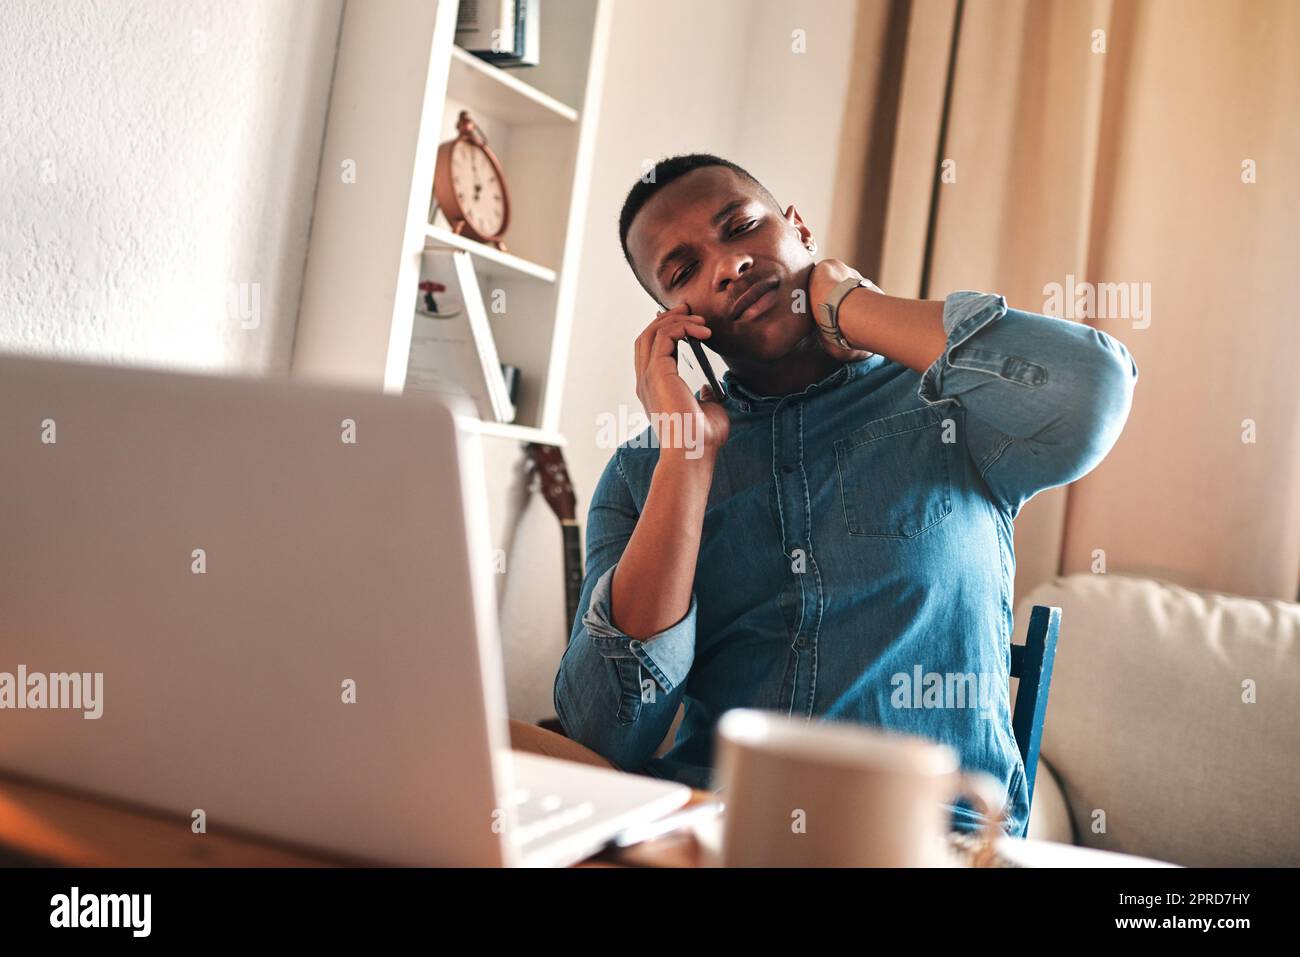 Headache, stress and pain while talking on a phone call and working from a laptop at home. Worried, anxious man rushing to meet a deadline, looking unhappy while suffering from neck pain and tension Stock Photo